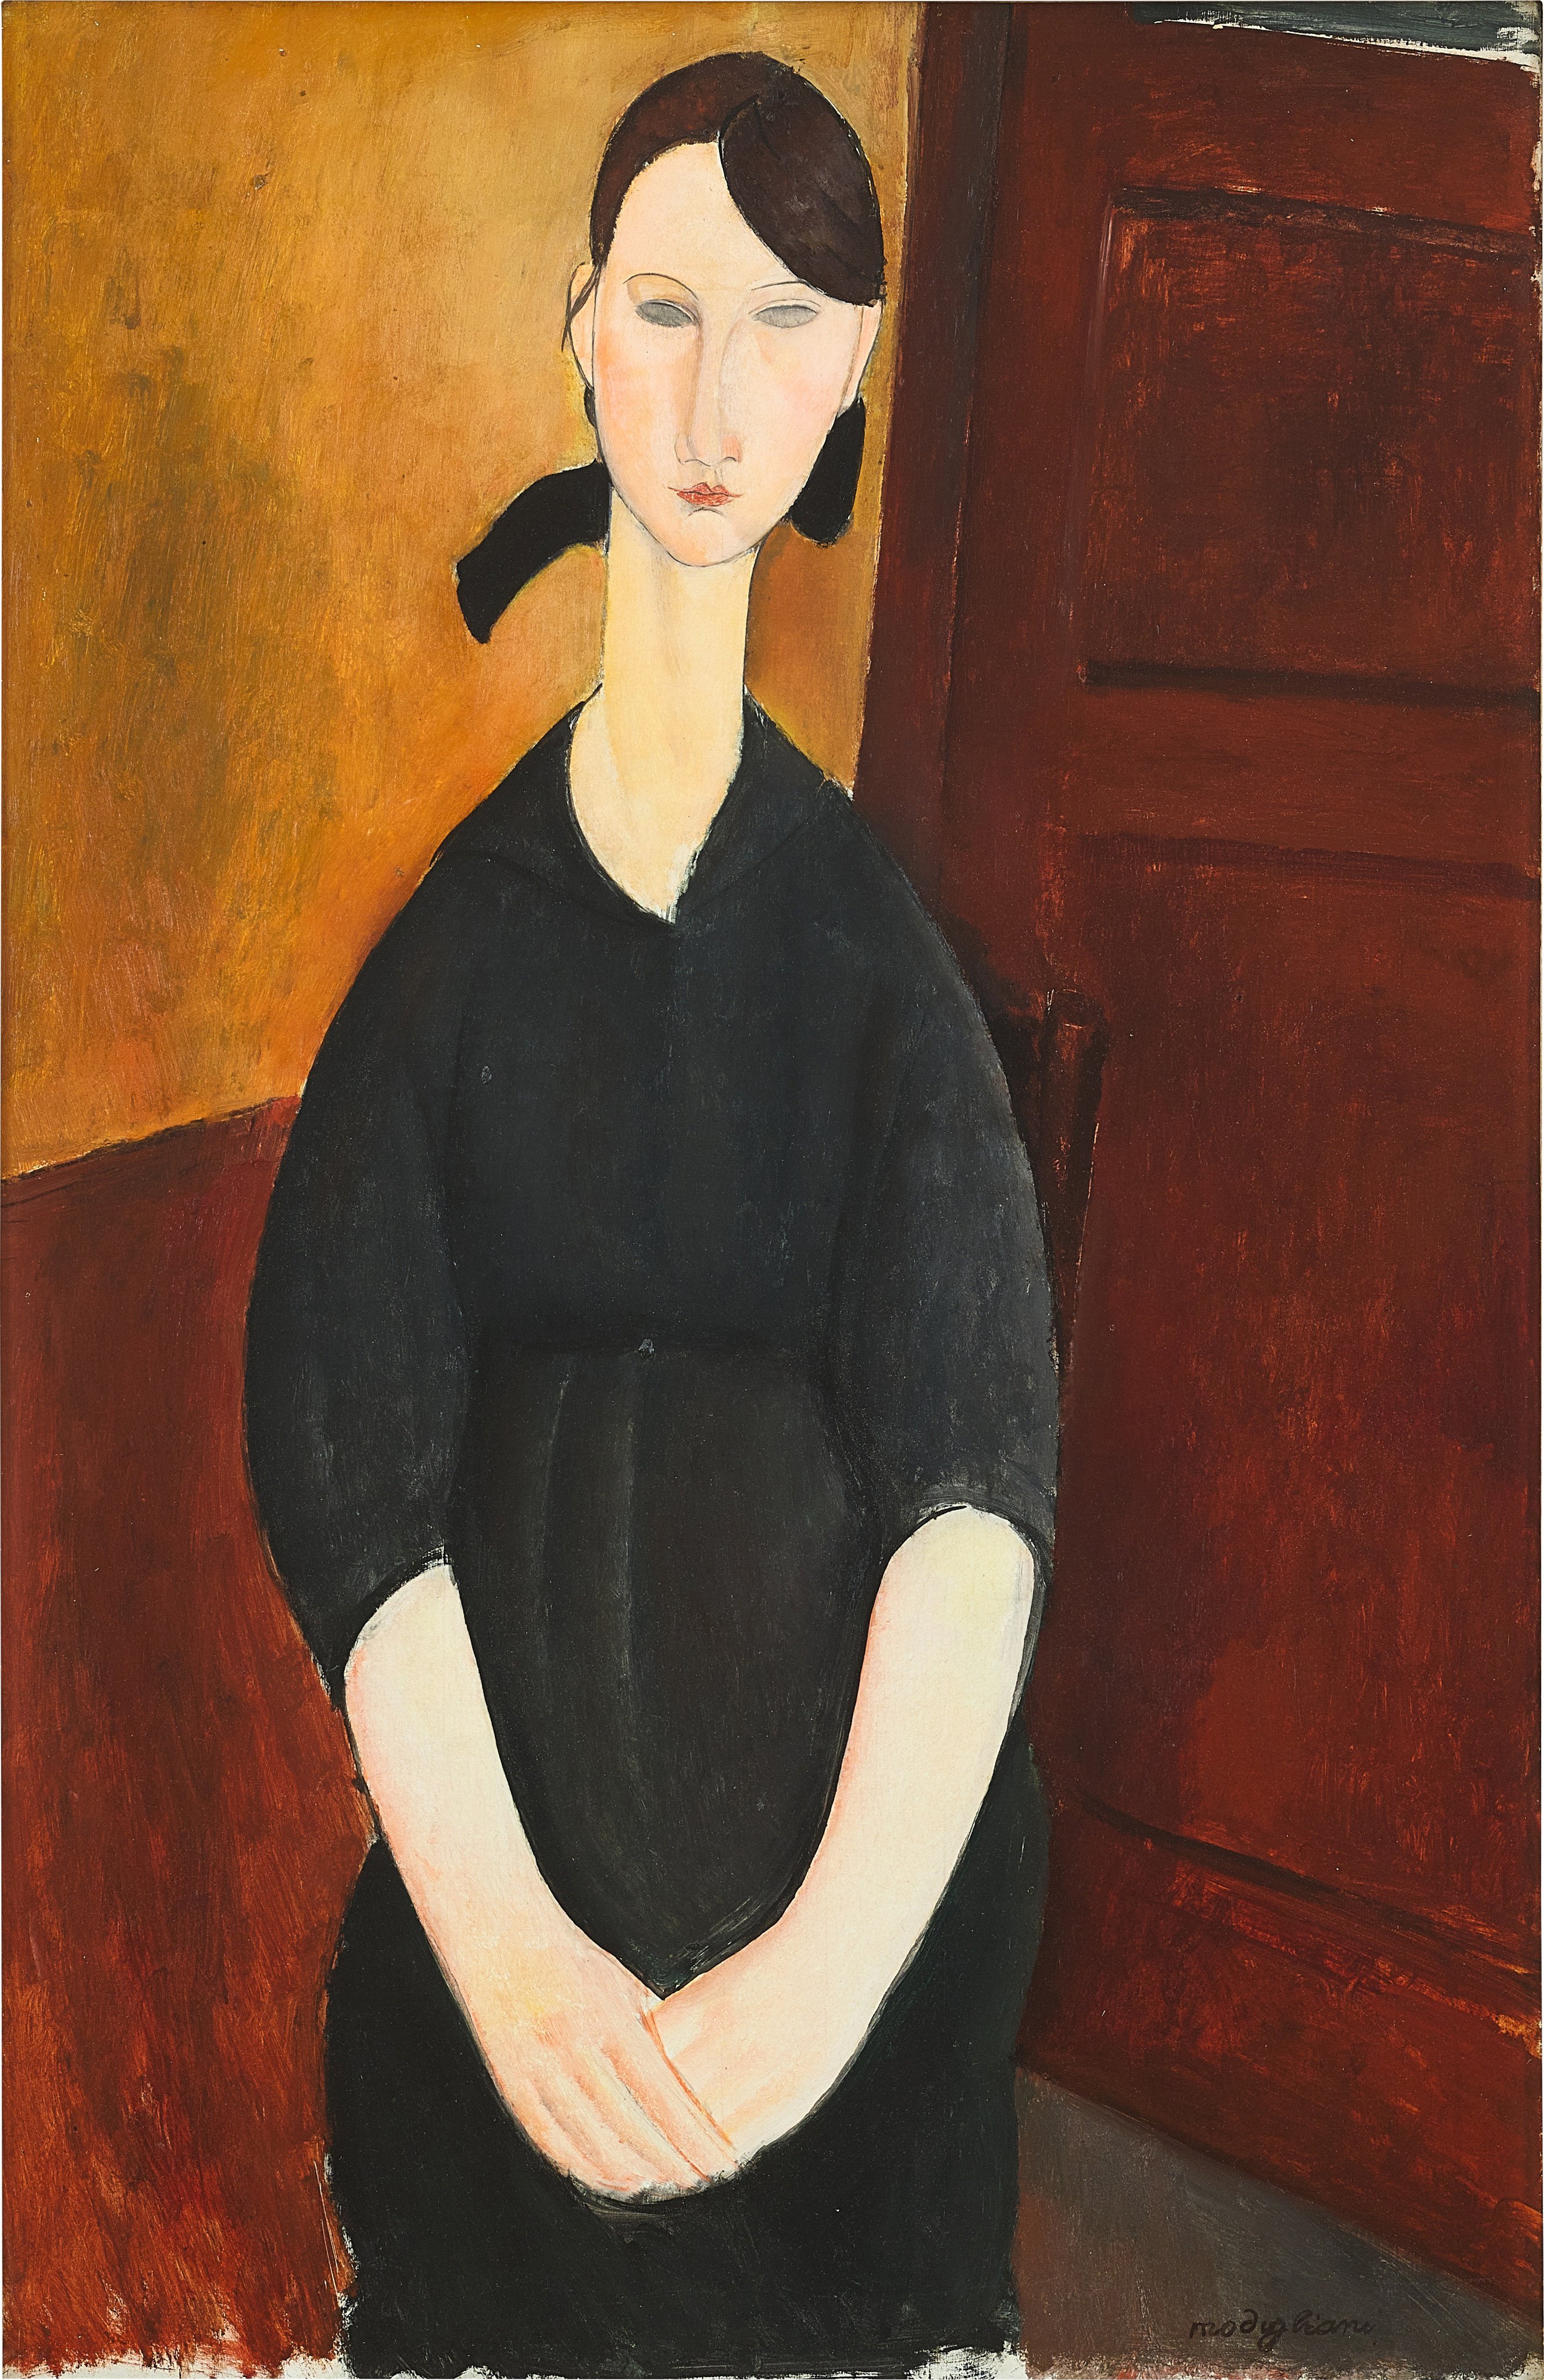 Paulette Jourdain (1919) by Amedeo Modigliani. Chinese billionaire collectors Liu Yiqian and his wife Wang Wei bought this painting in 2015 for US$42.8 million. Photo: Sotheby’s